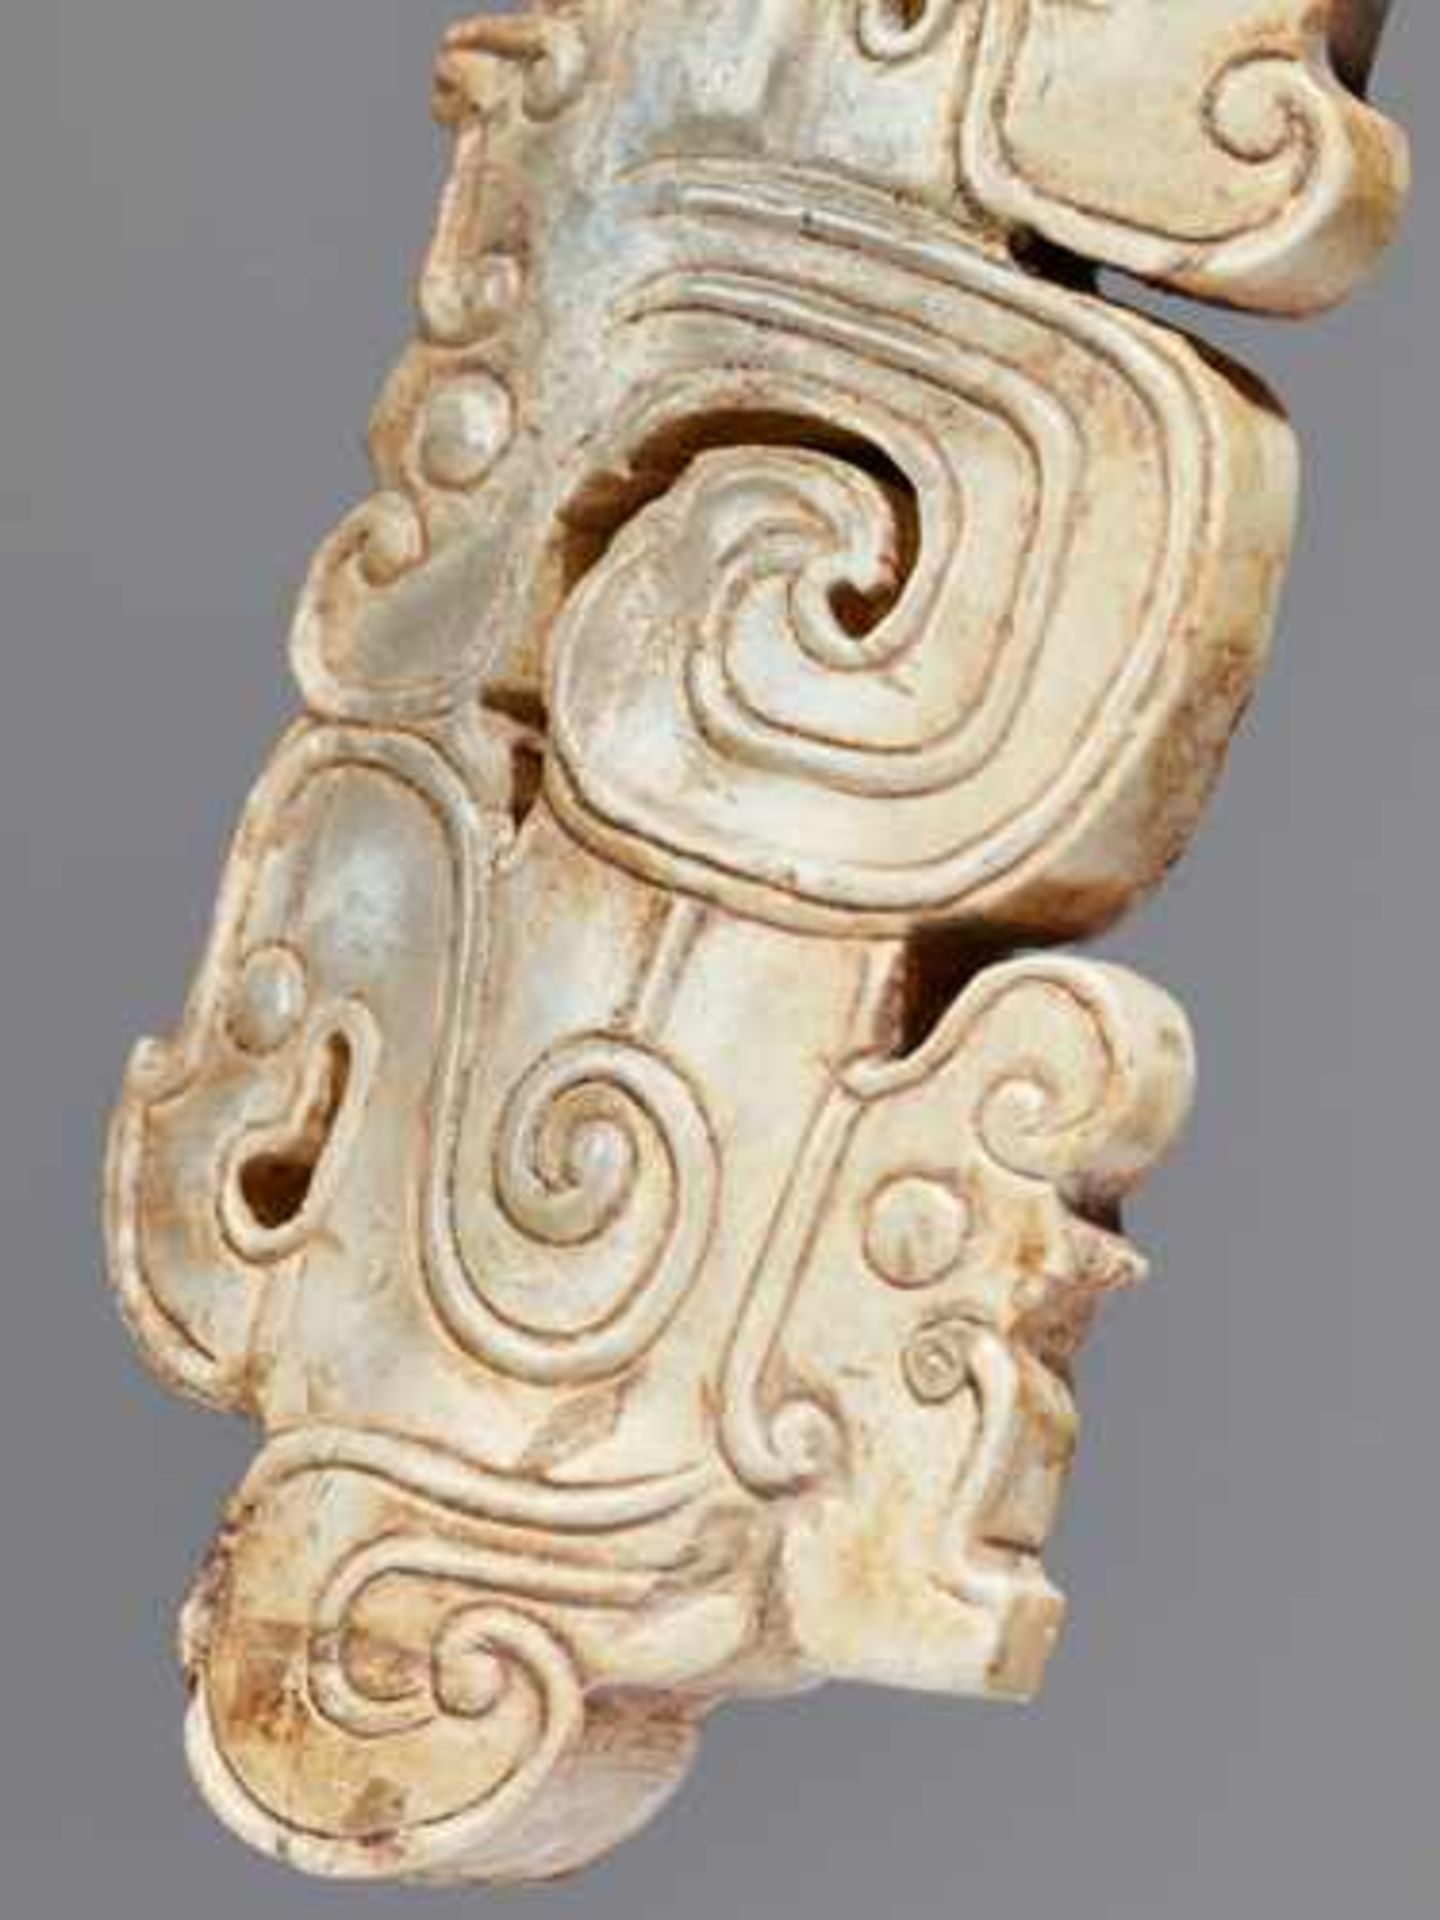 A SCULPTURAL ORNAMENT WITH A COMPOSITE MOTIF OF HUMAN HEADS AND DRAGONS Jade, China. Western Zhou, - Image 8 of 10